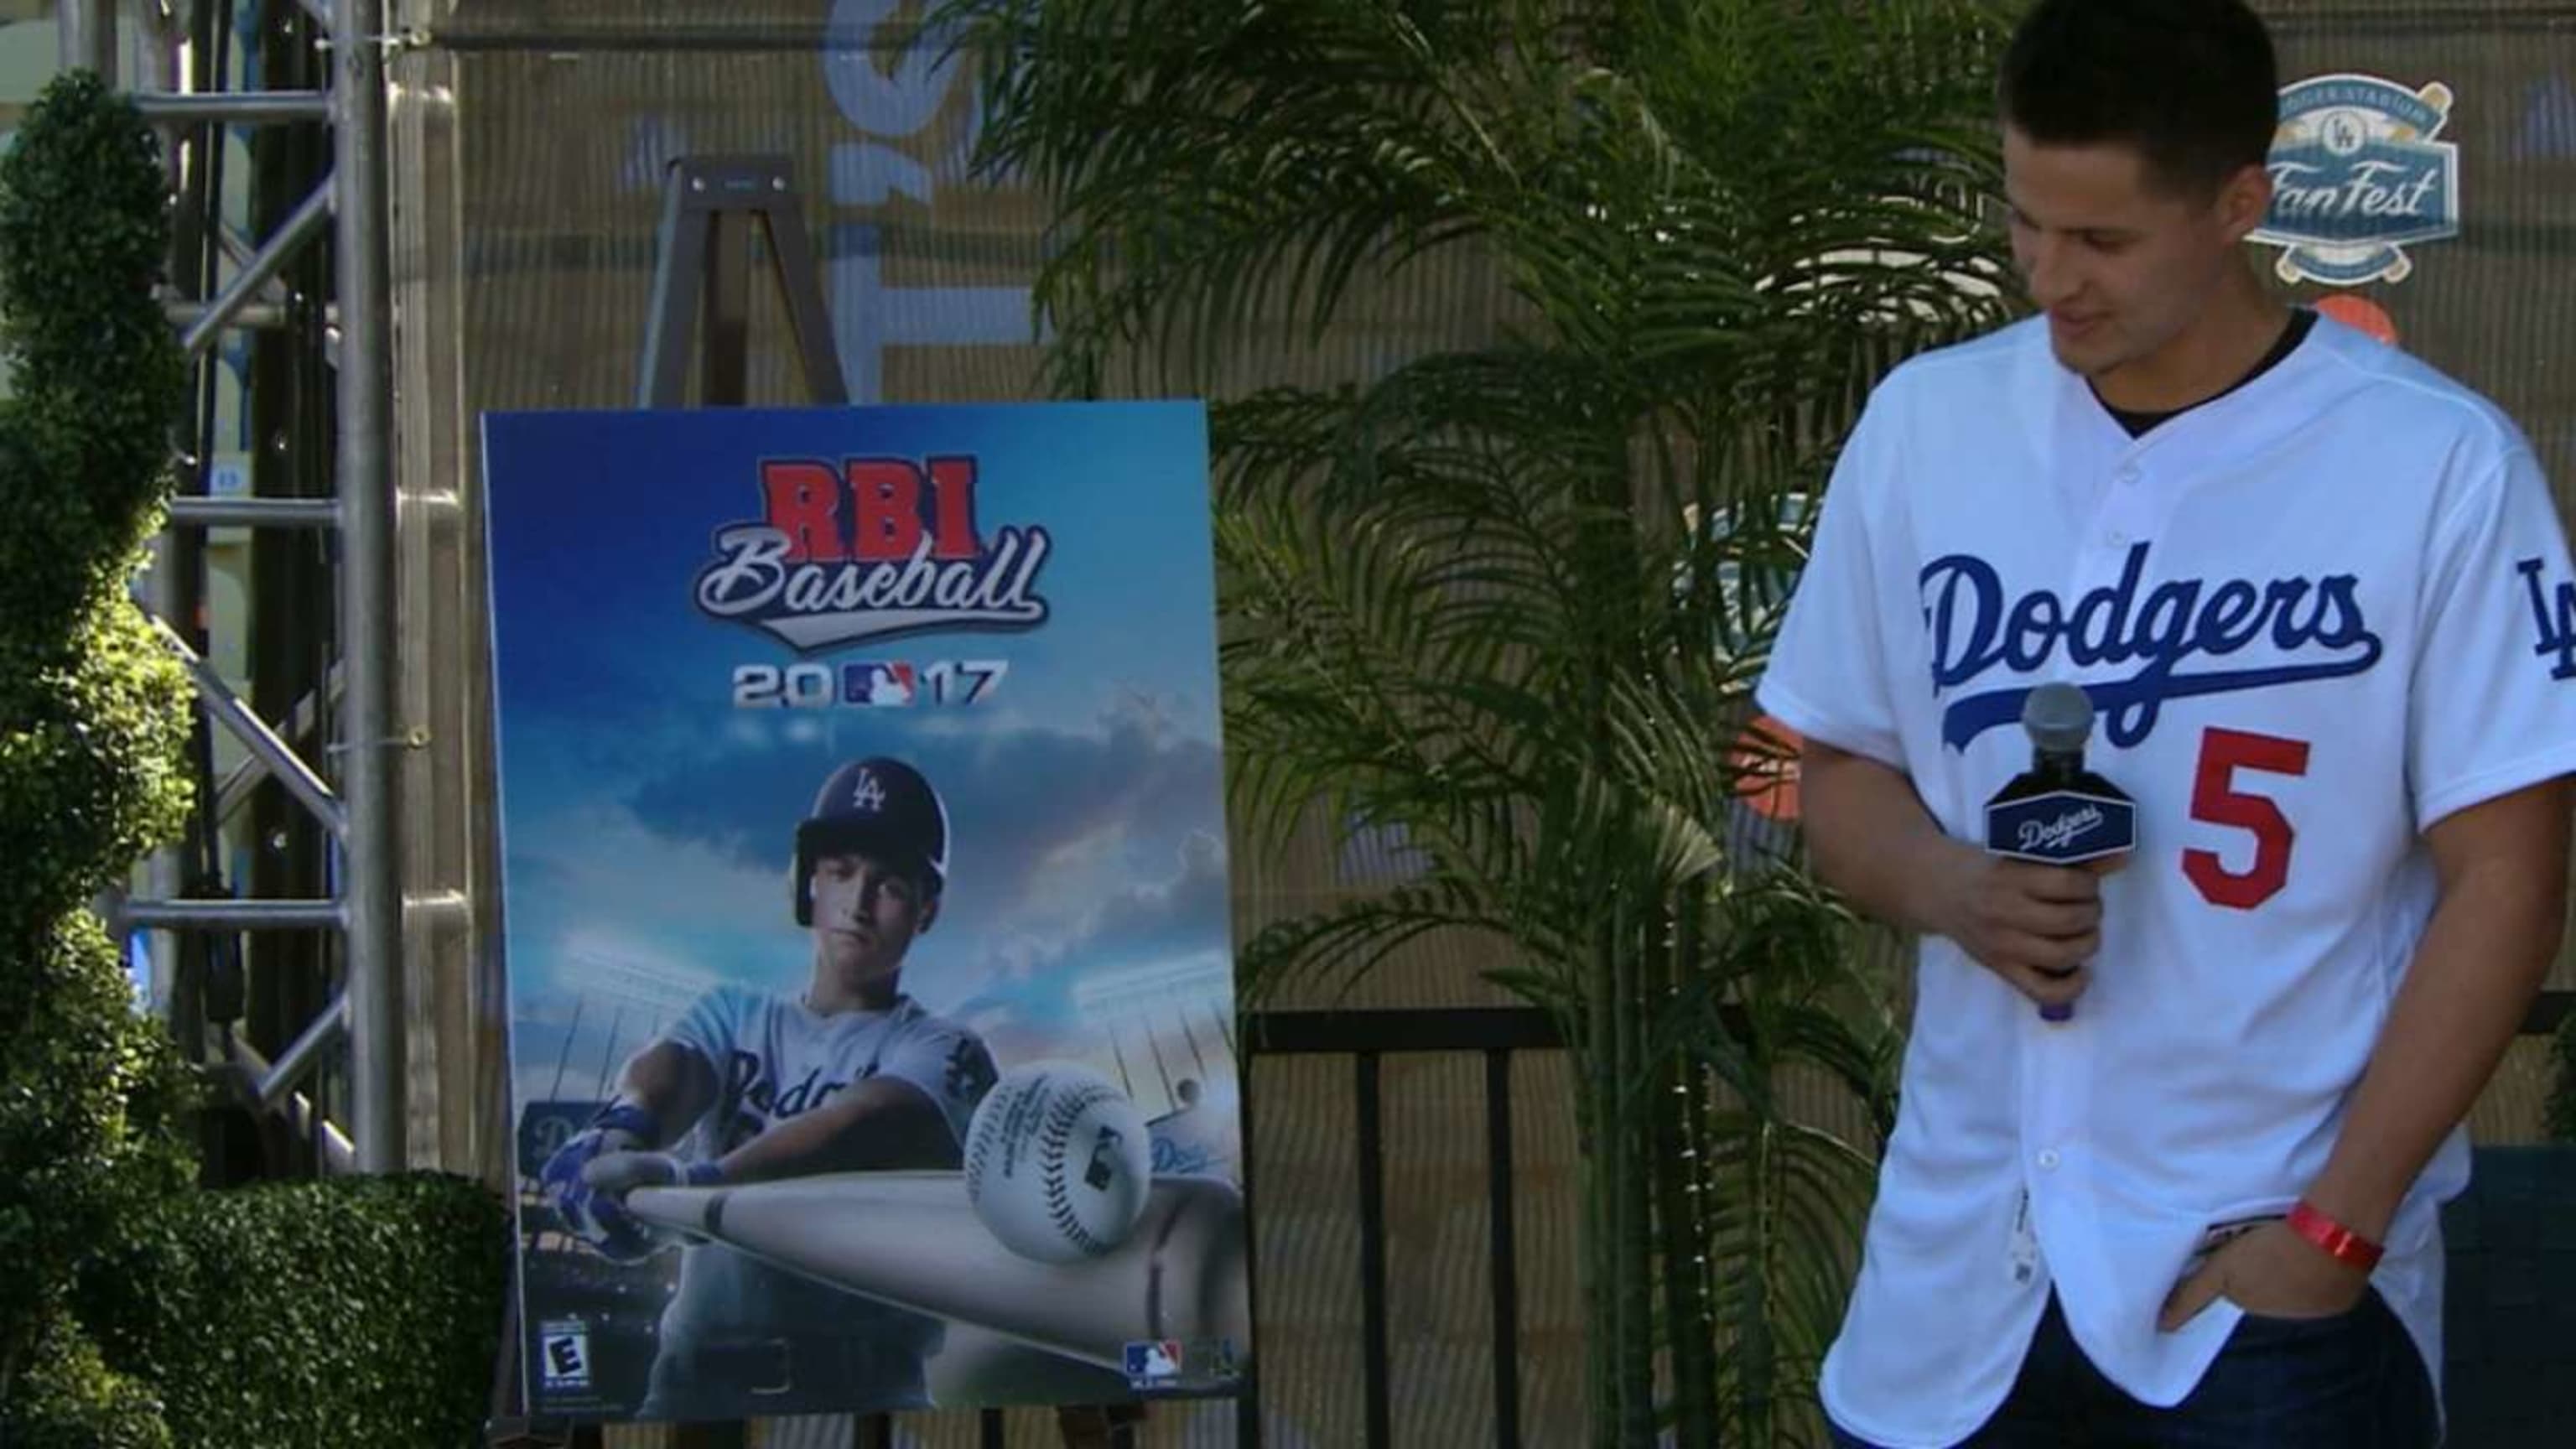 Introducing your R.B.I. Baseball 17 cover Corey Seager! MLB.com